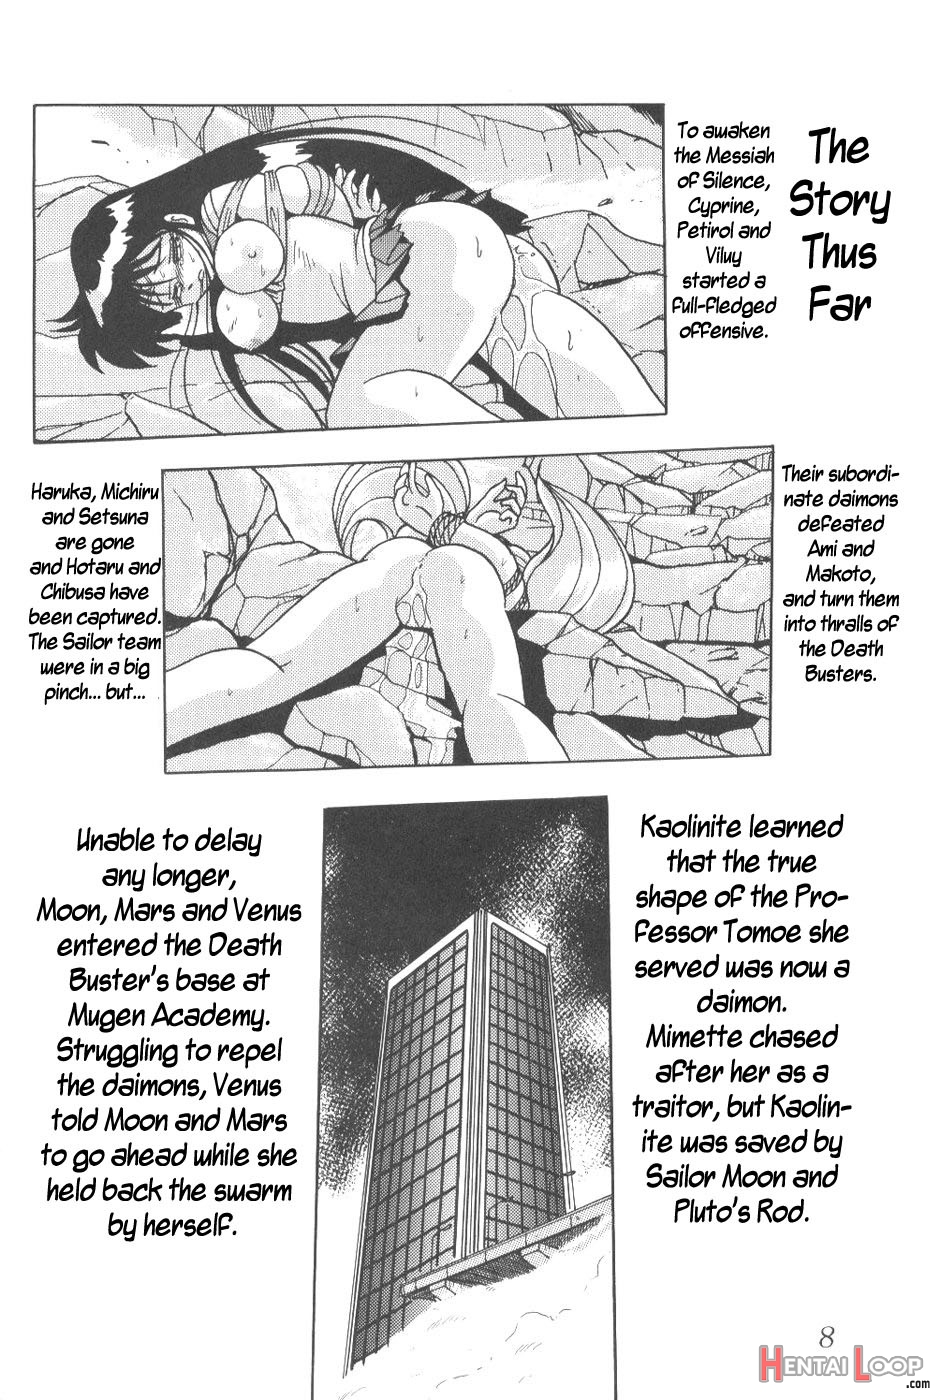 Silent Saturn 9 page 6